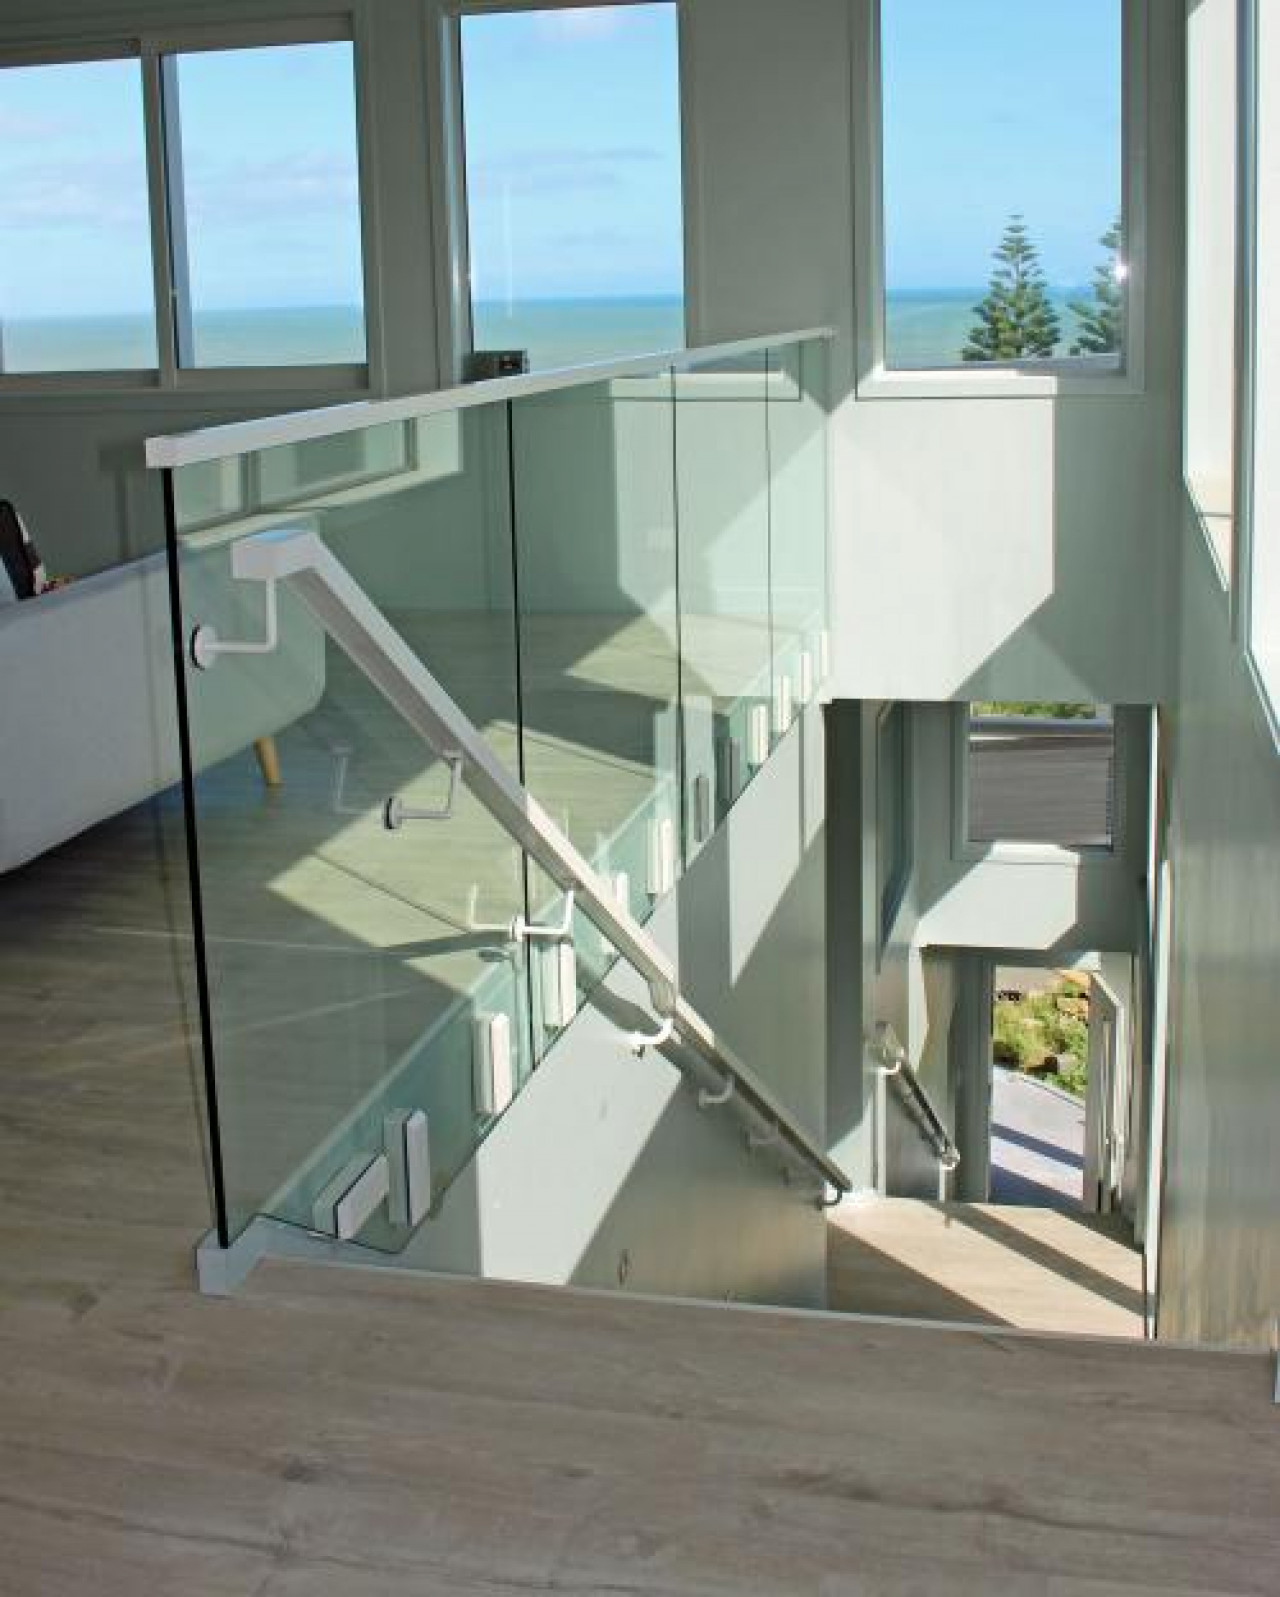 ResizedImage500624 Edgetec JH Clamp Frameless Glass Balustrade with Interlinking Top rail and handrail